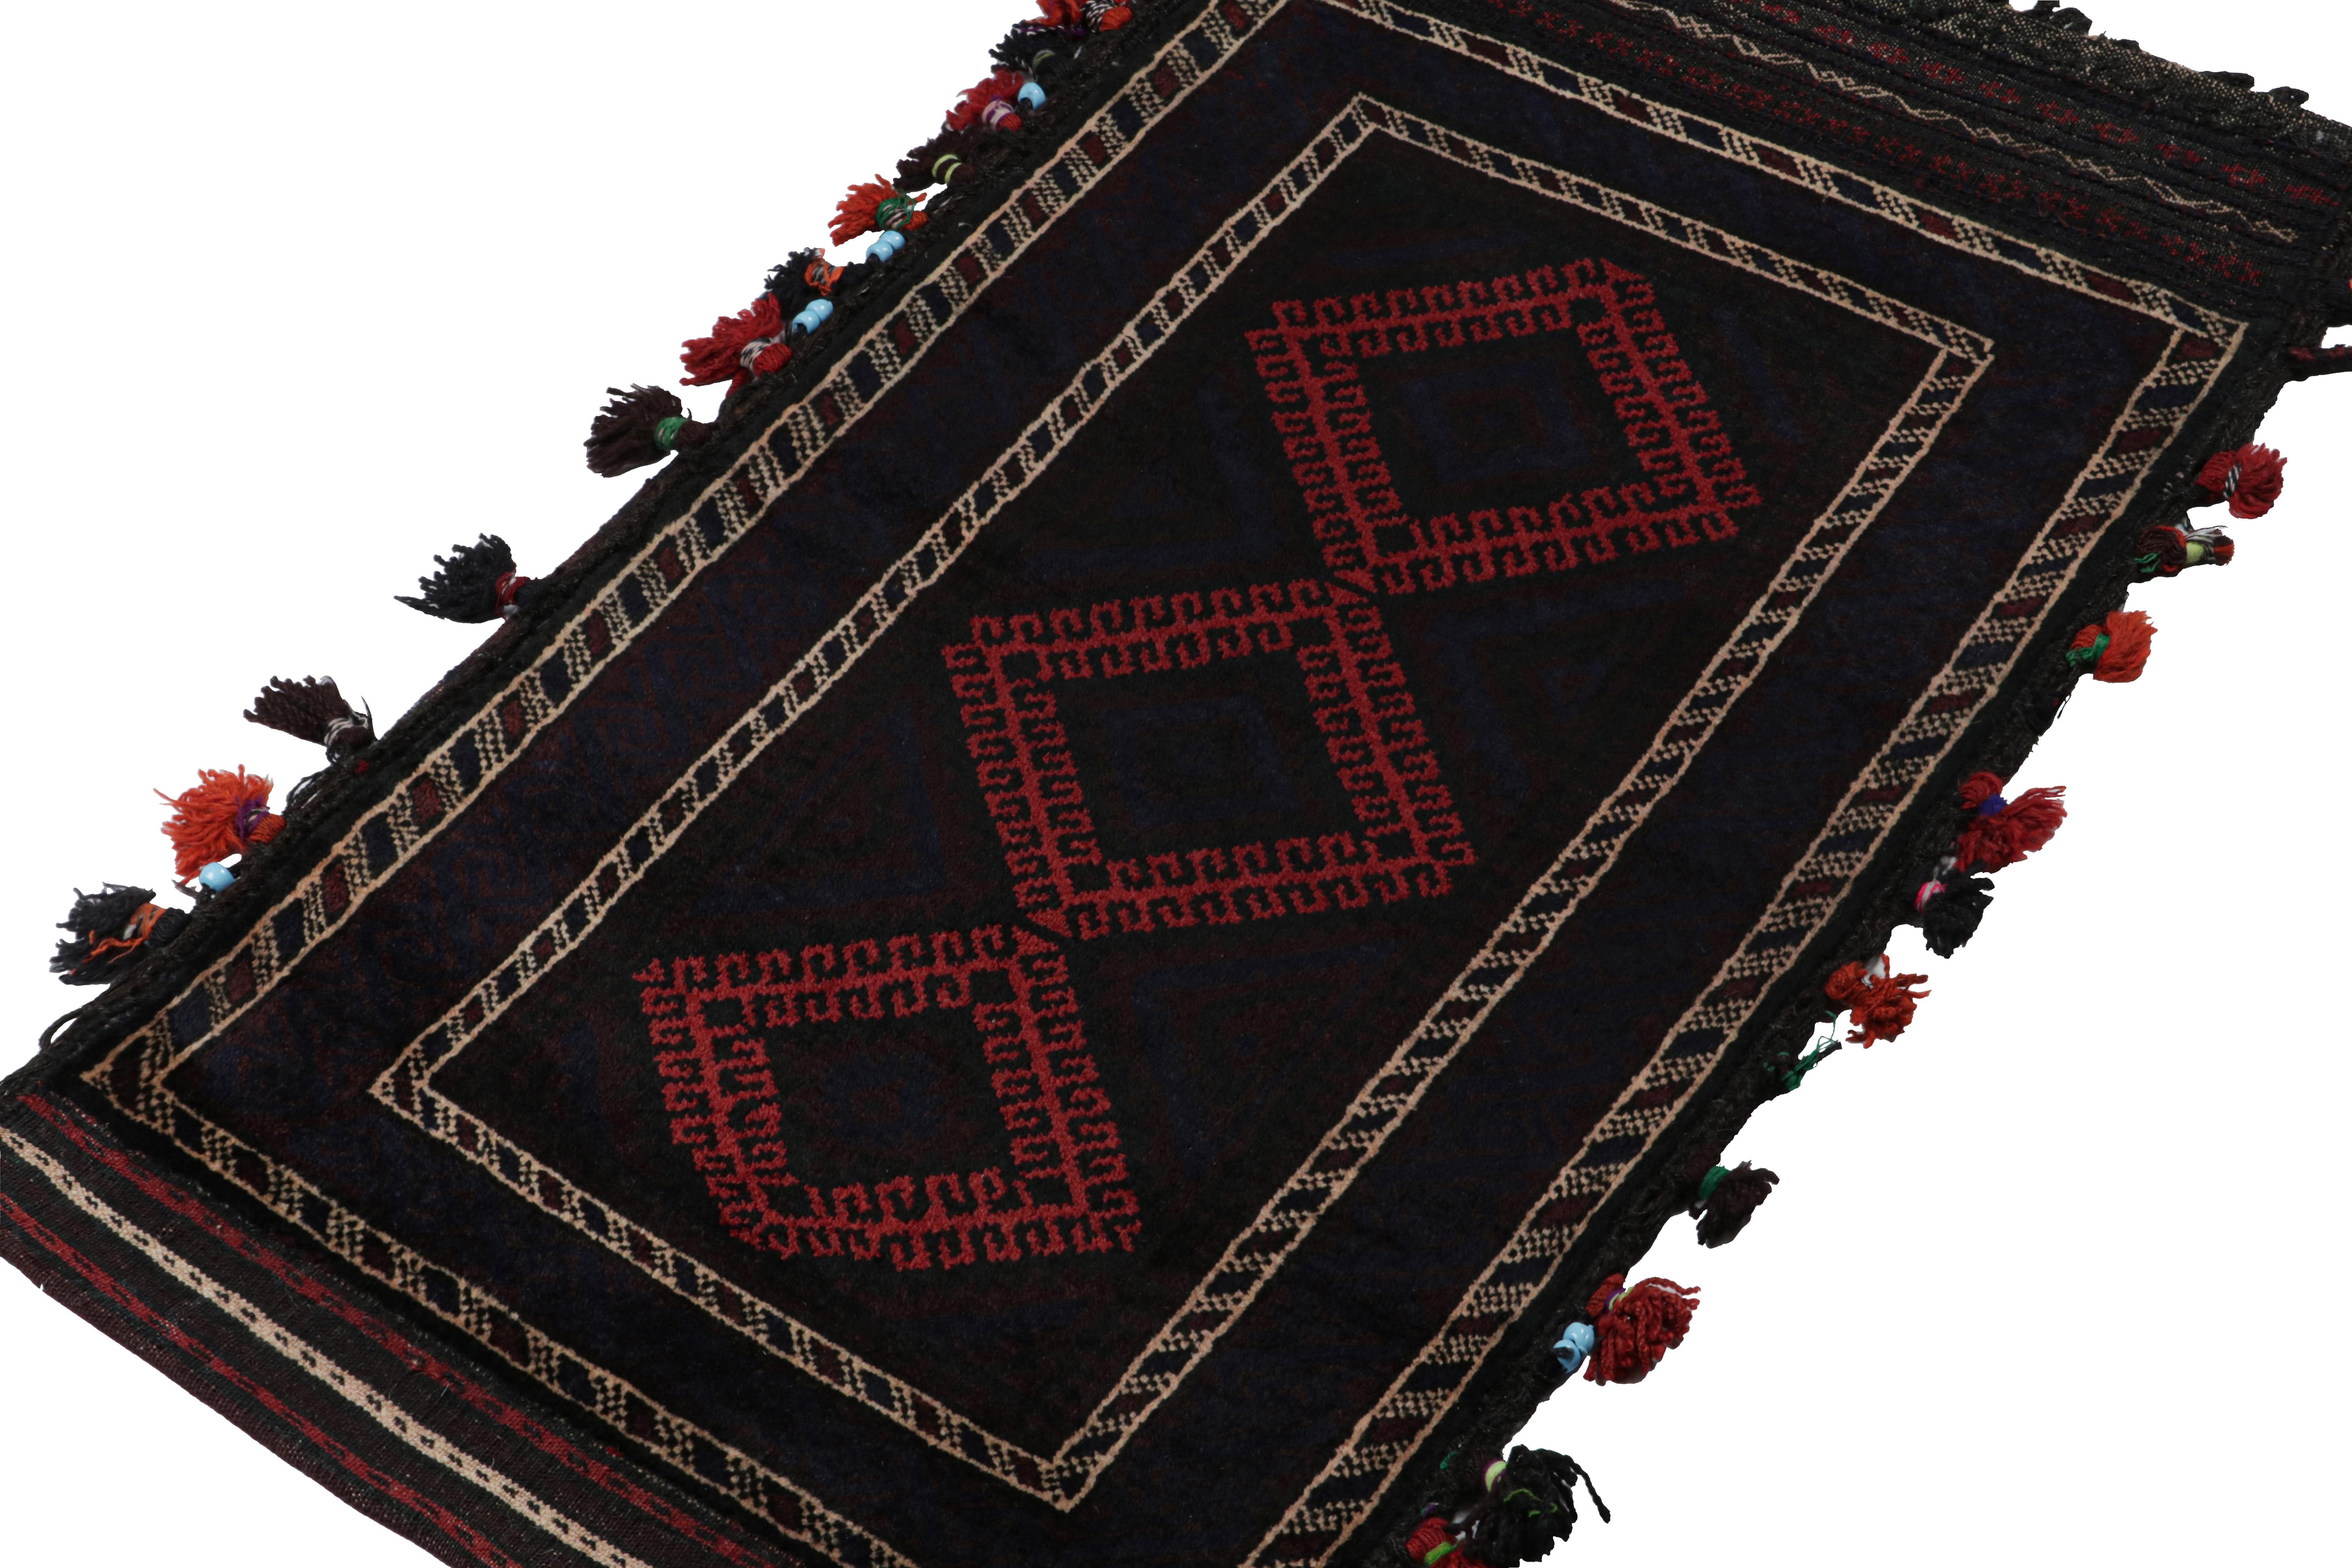 Hand-knotted in wool, this 2x3 Baluch Persian rug of the 1950s is the latest to enter Rug & Kilim’s Antique & Vintage collection.

On the Design:

The piece carries tribal geometric patterns in rich tones of red & black. A keen eye will note hints